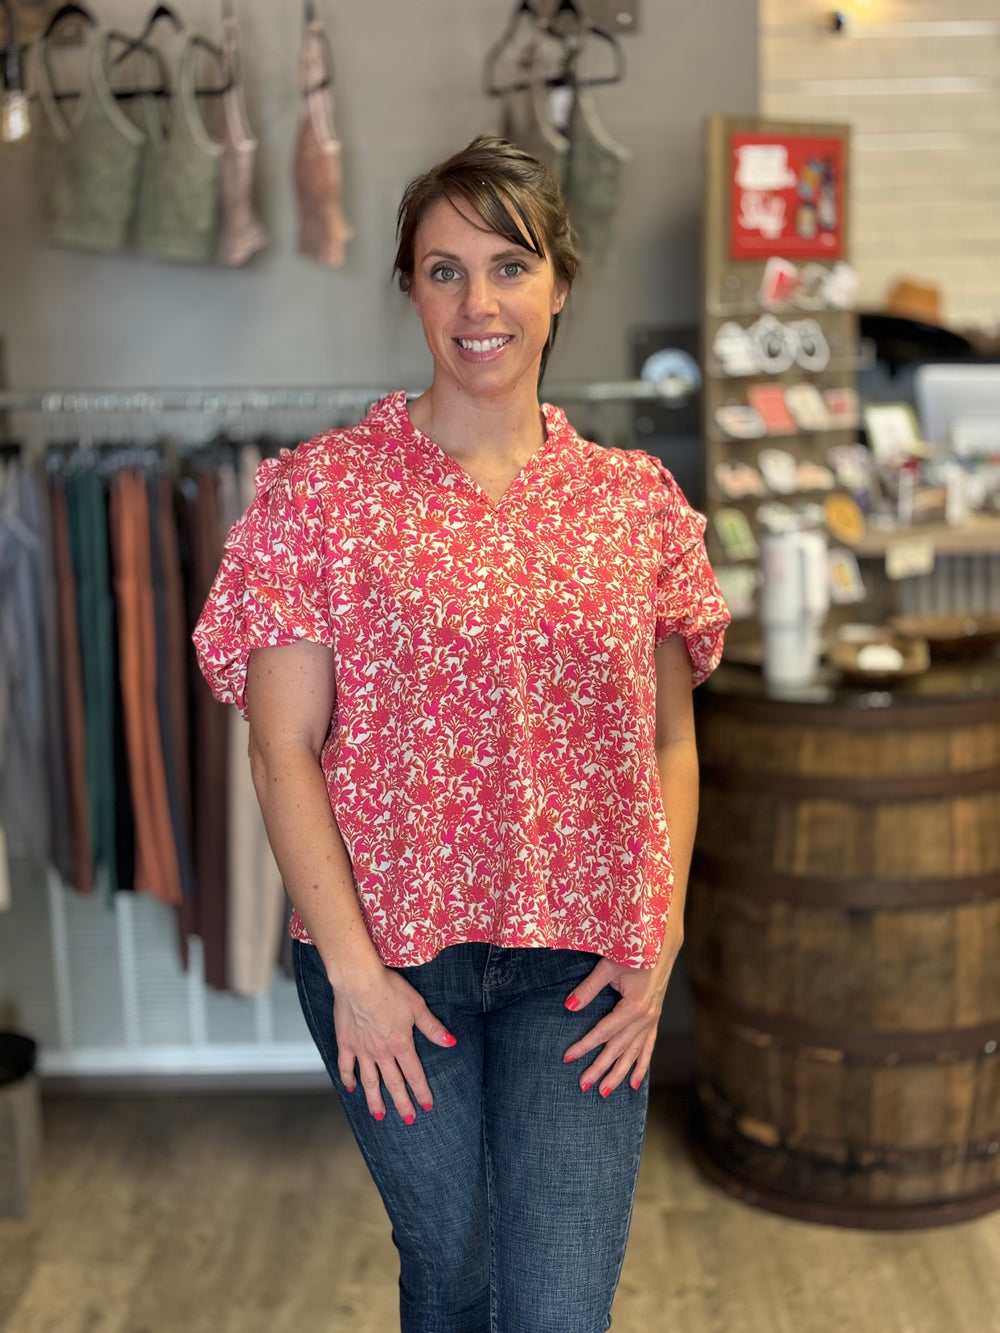 Petal Princess Ruffled Sleeved Top-Short Sleeves-Entro-Evergreen Boutique, Women’s Fashion Boutique in Santa Claus, Indiana